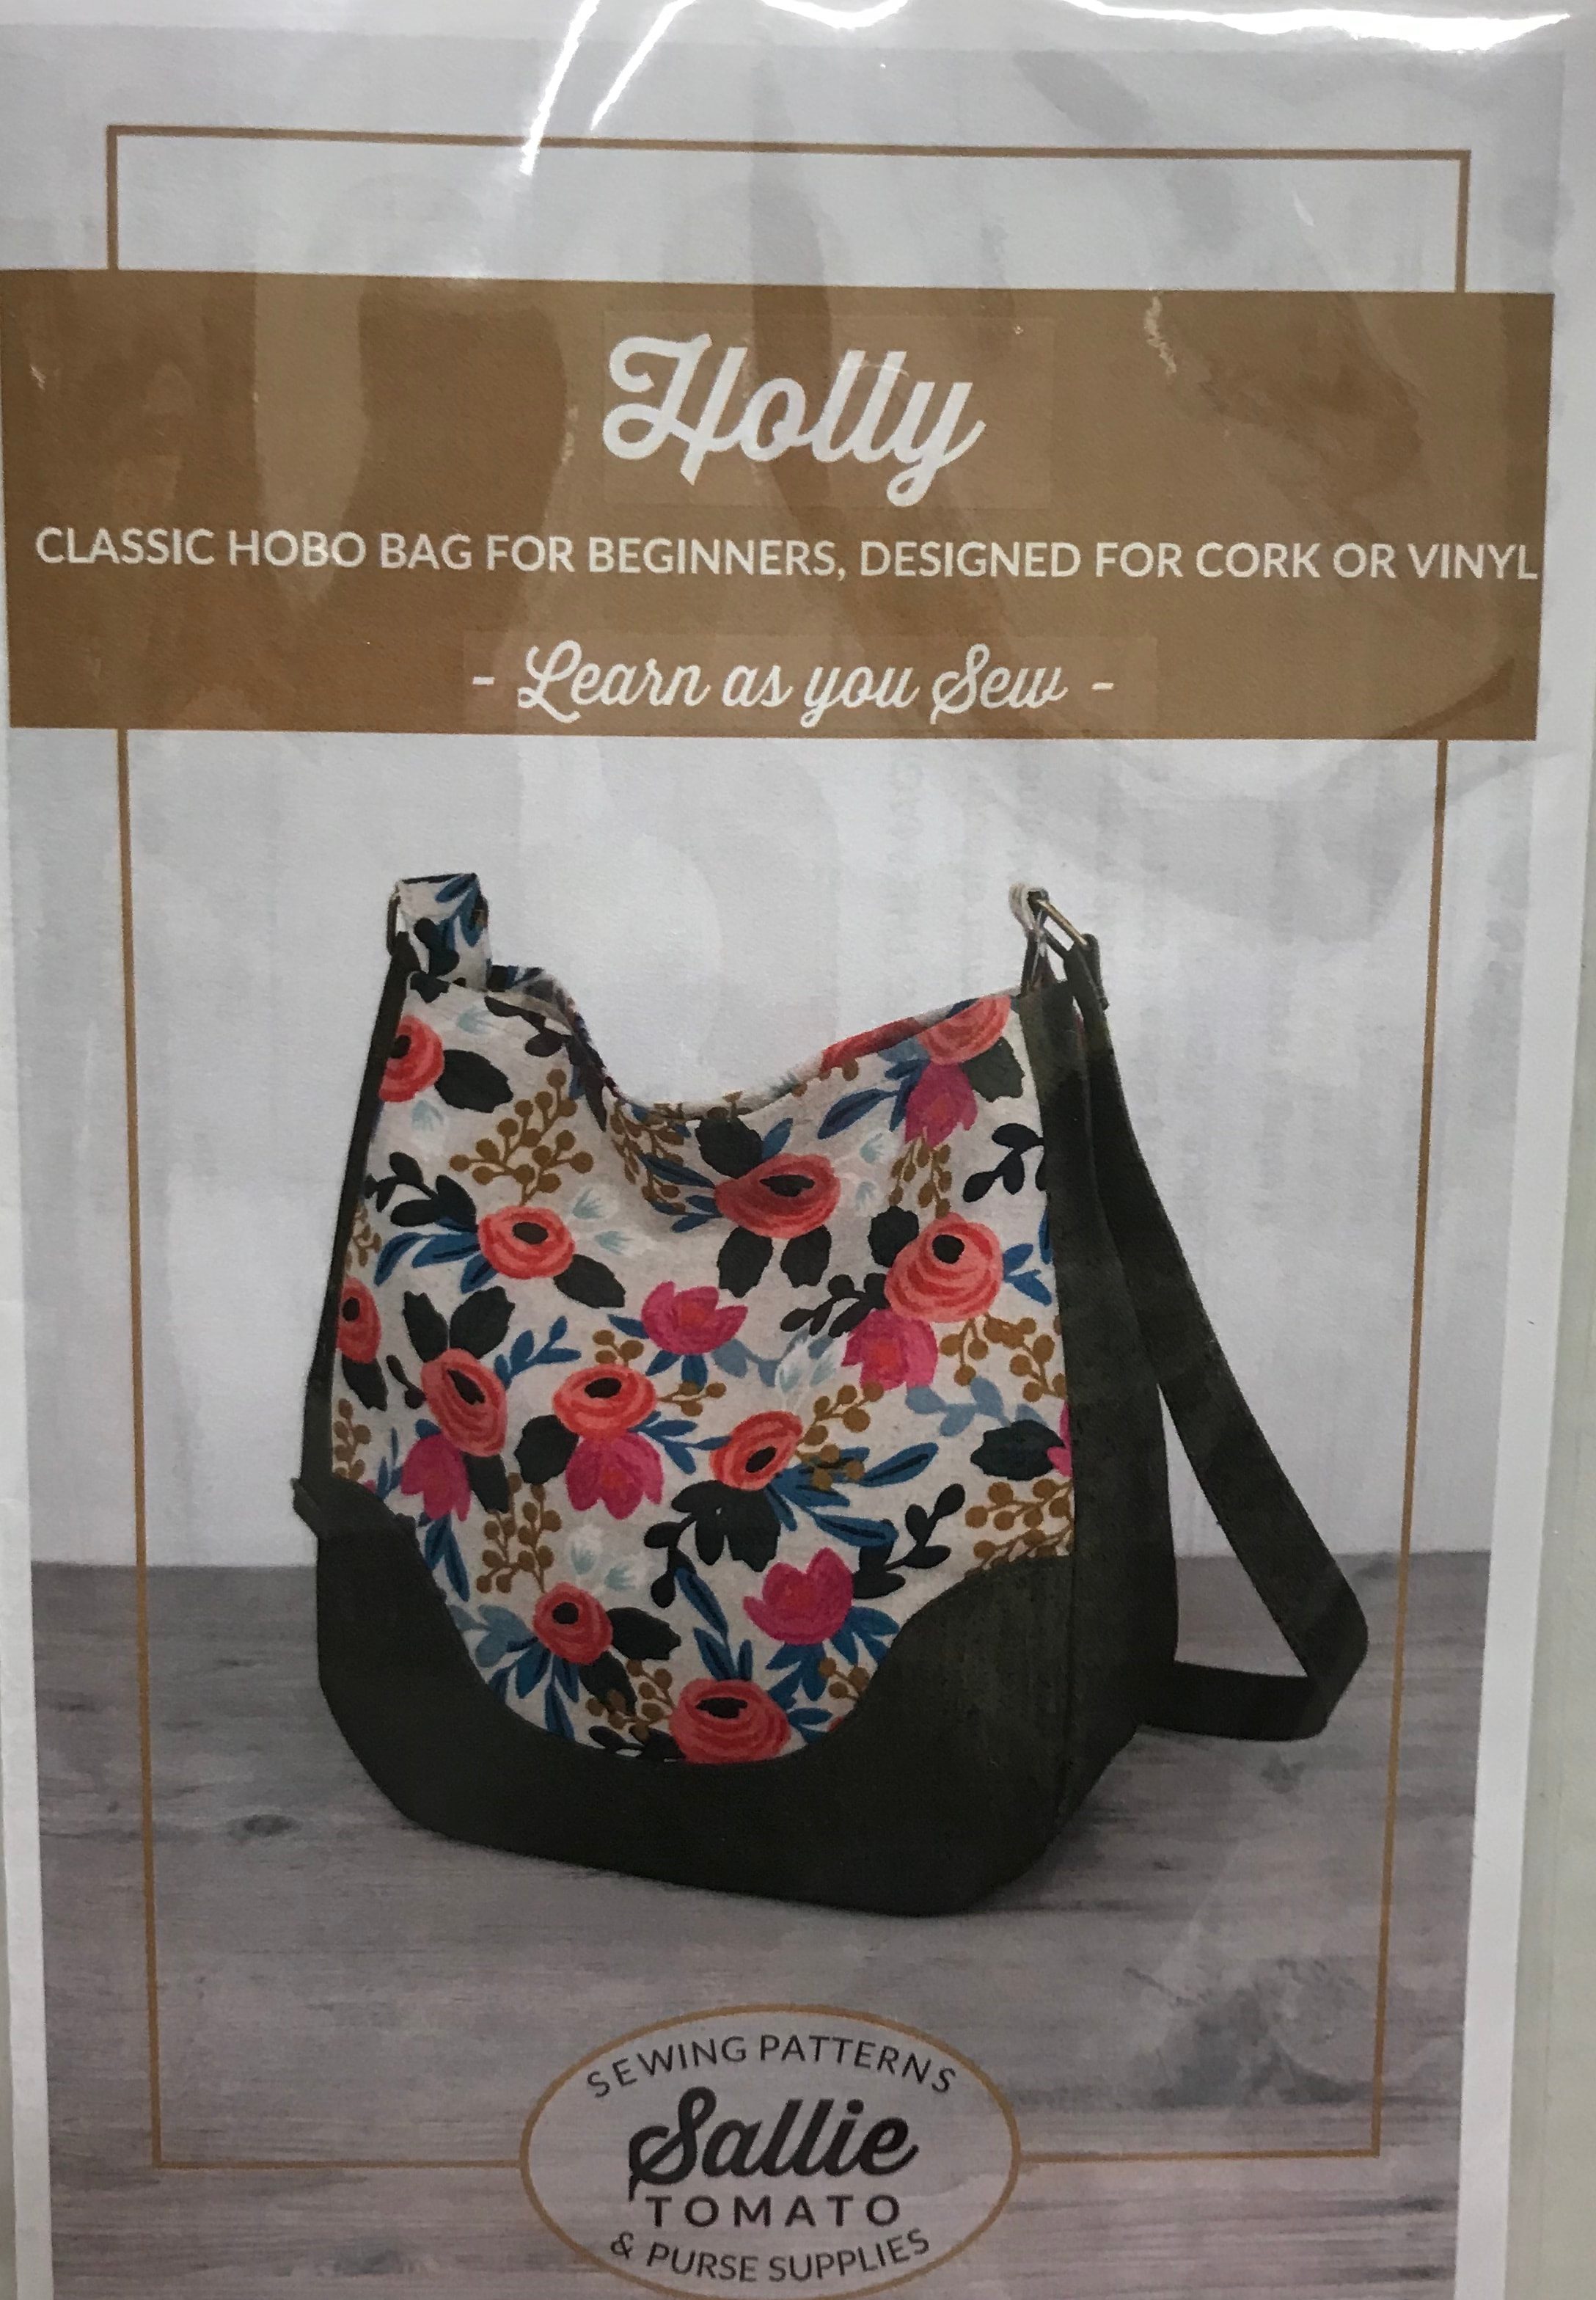 Holly Classic Hobo Bag Pattern